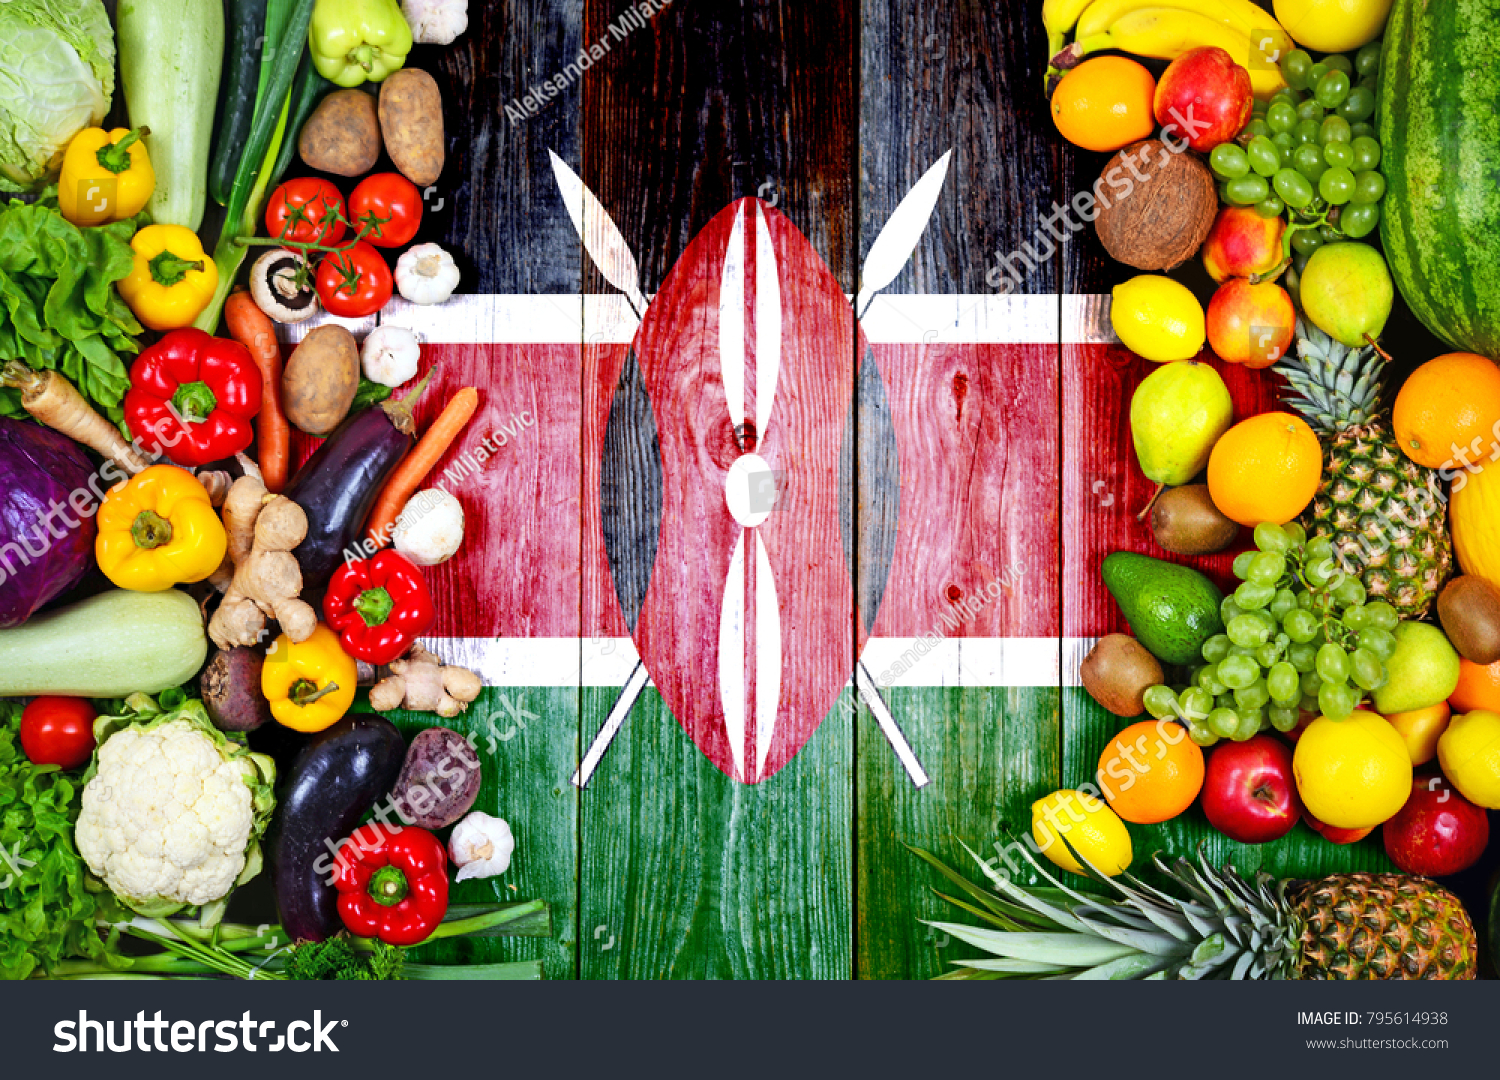 Fresh fruits and vegetables from Kenya #795614938